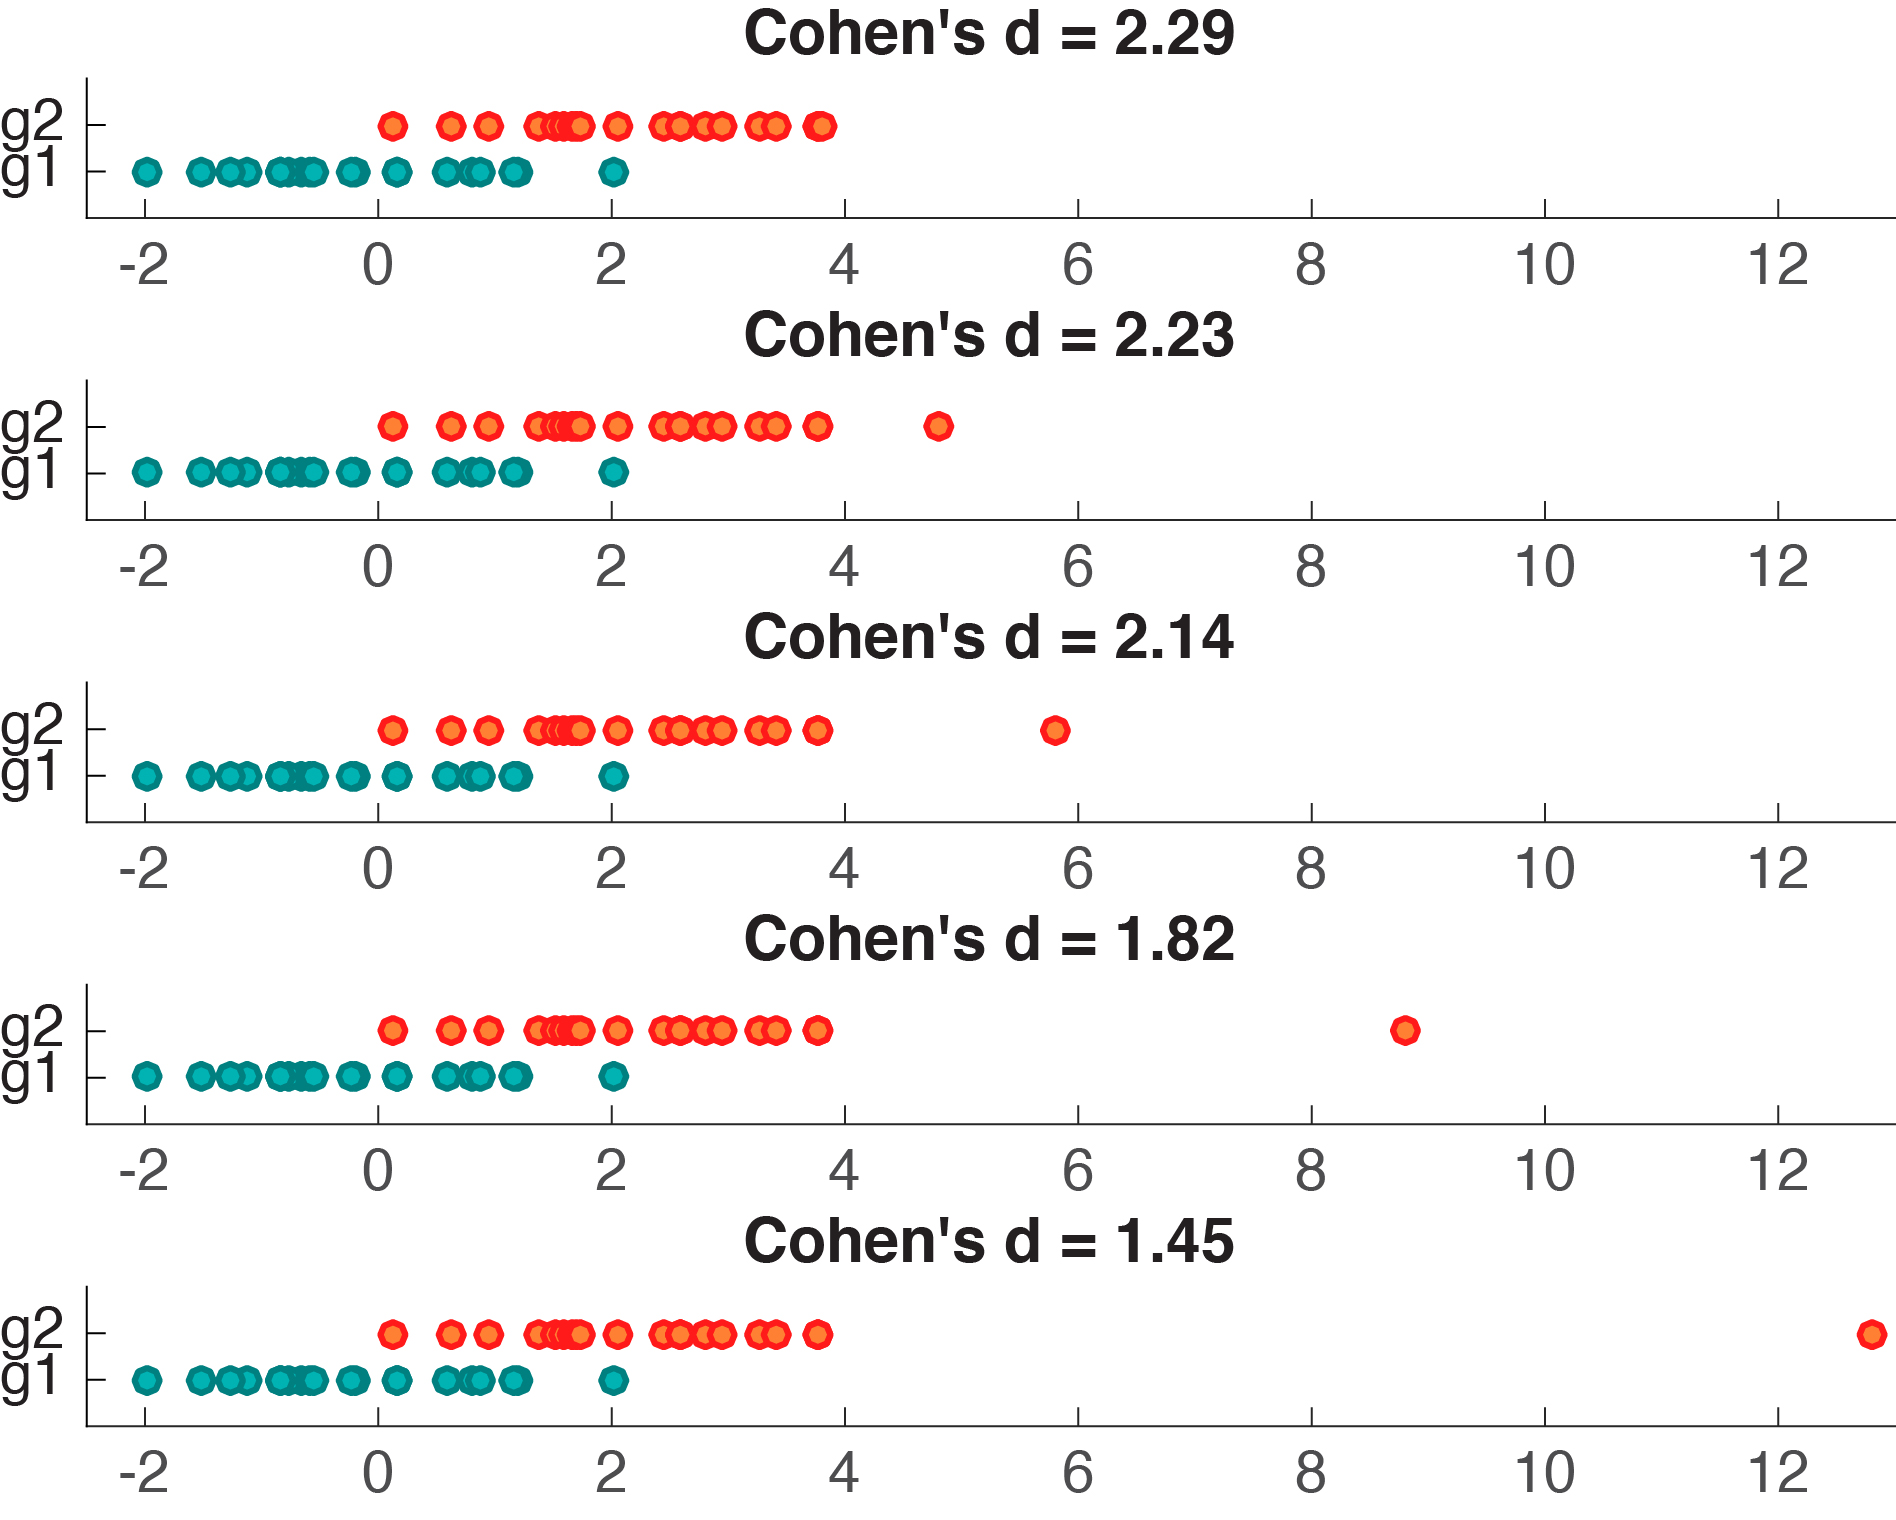 fig3-cohend_outliers